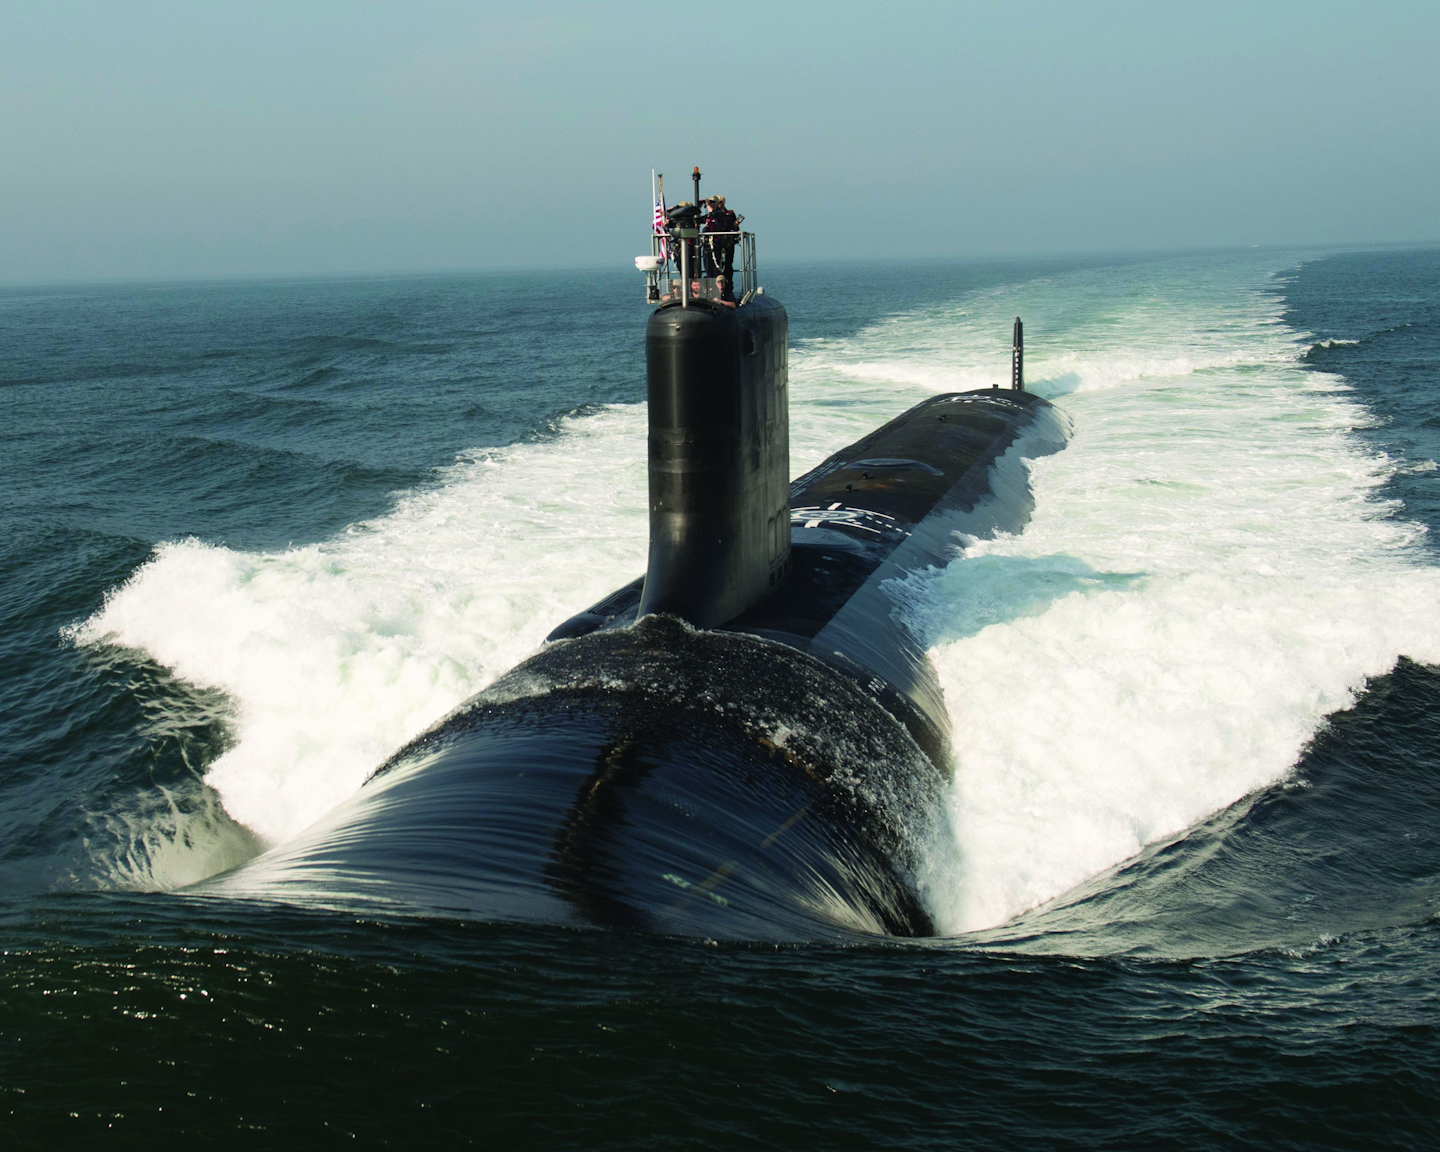 The U.S. Navy’s front-line Virginia-class fast attack submarines are prime candidates for electronics technology insertion and upgrades.